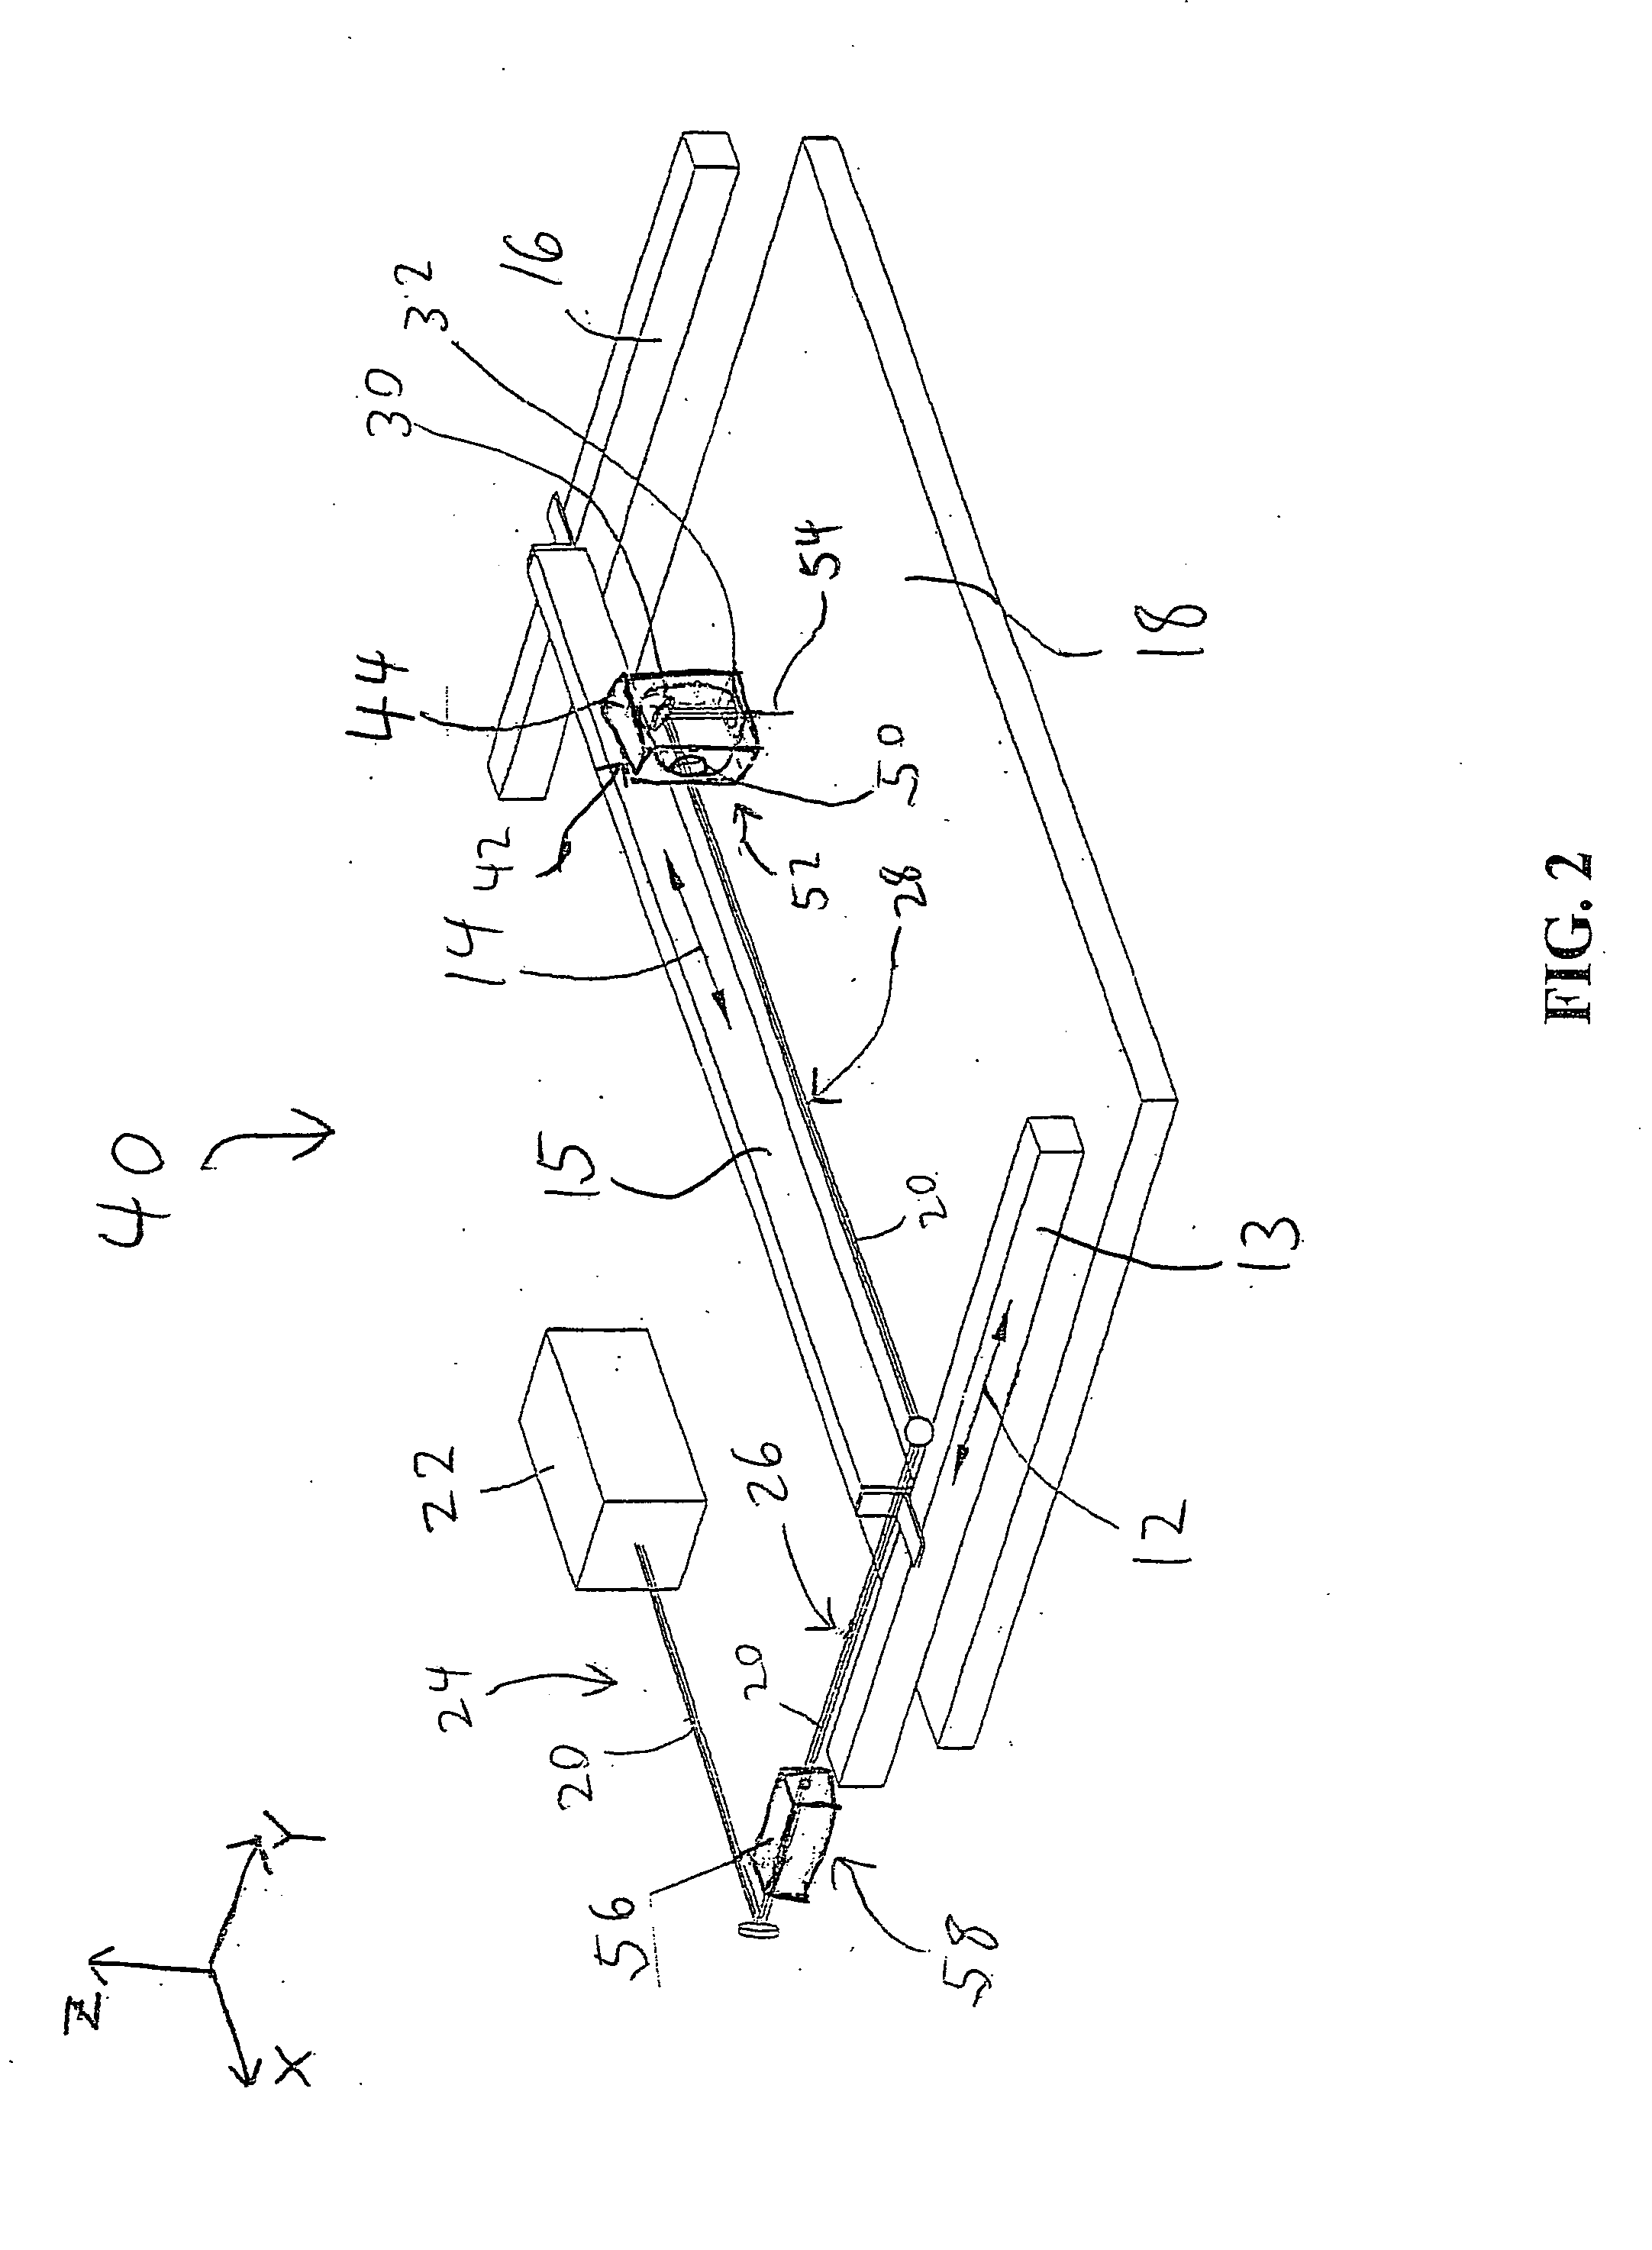 Laser material processing system